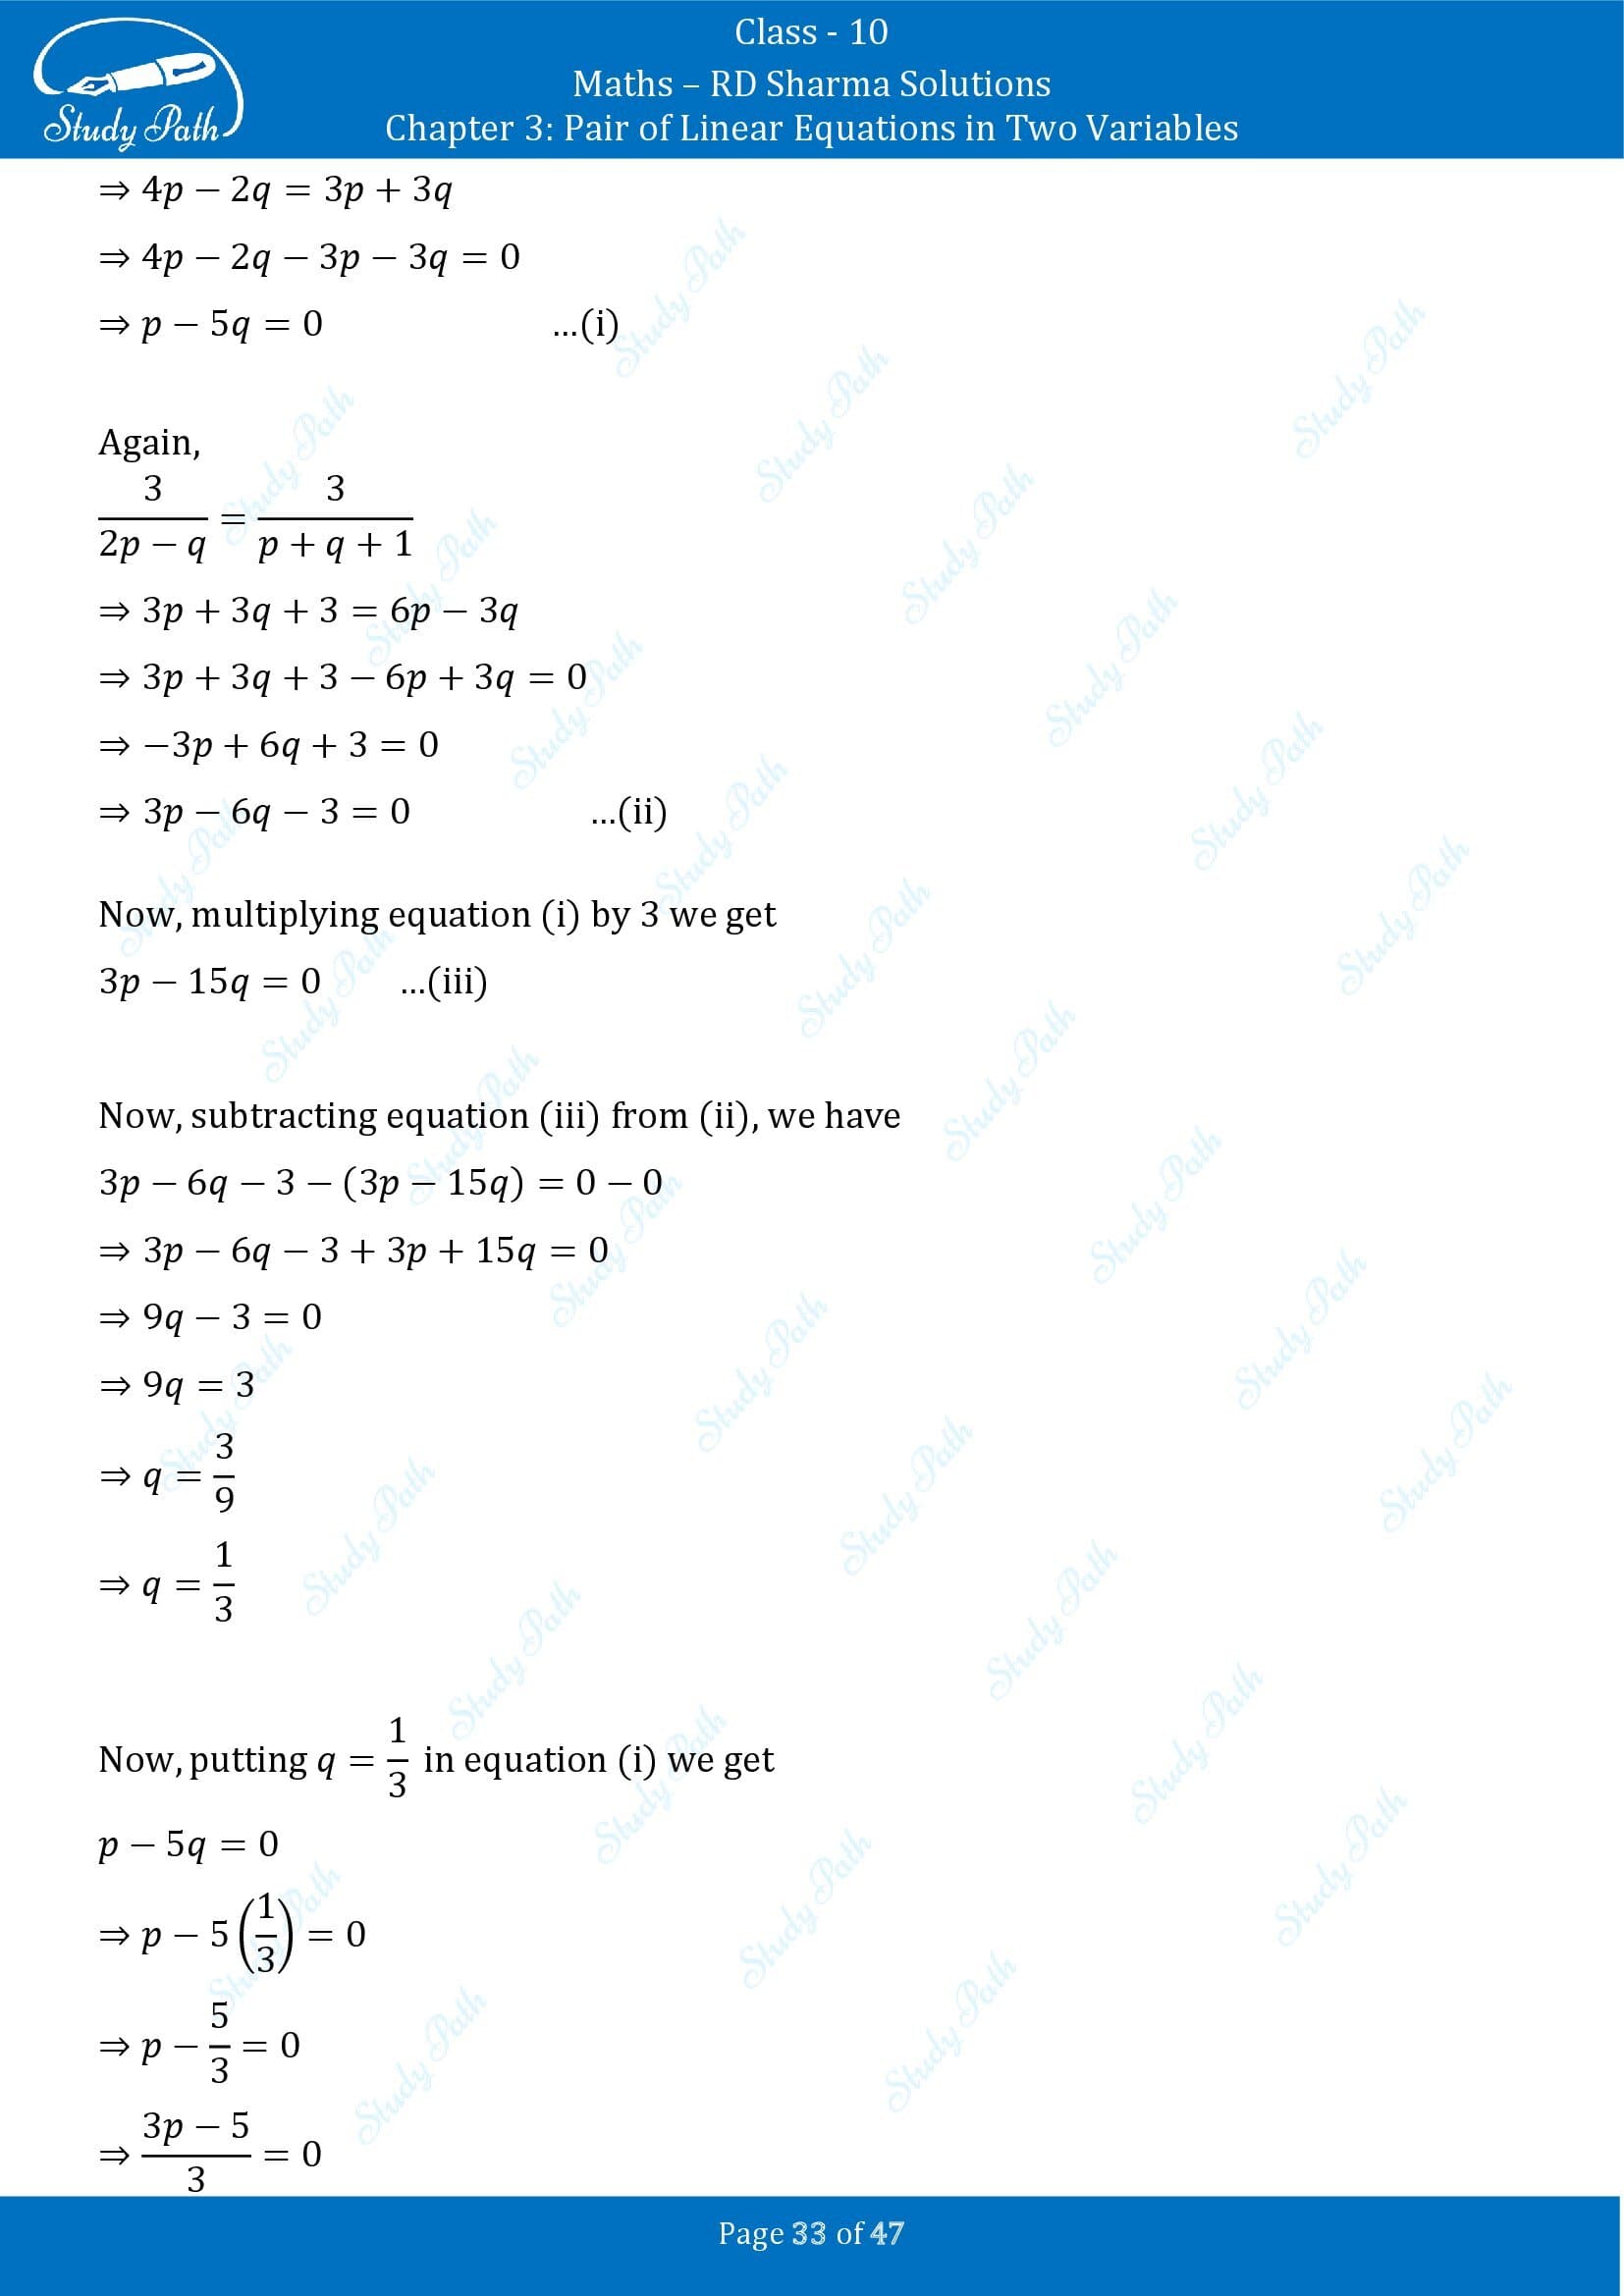 RD Sharma Solutions Class 10 Chapter 3 Pair of Linear Equations in Two Variables Exercise 3.5 00033